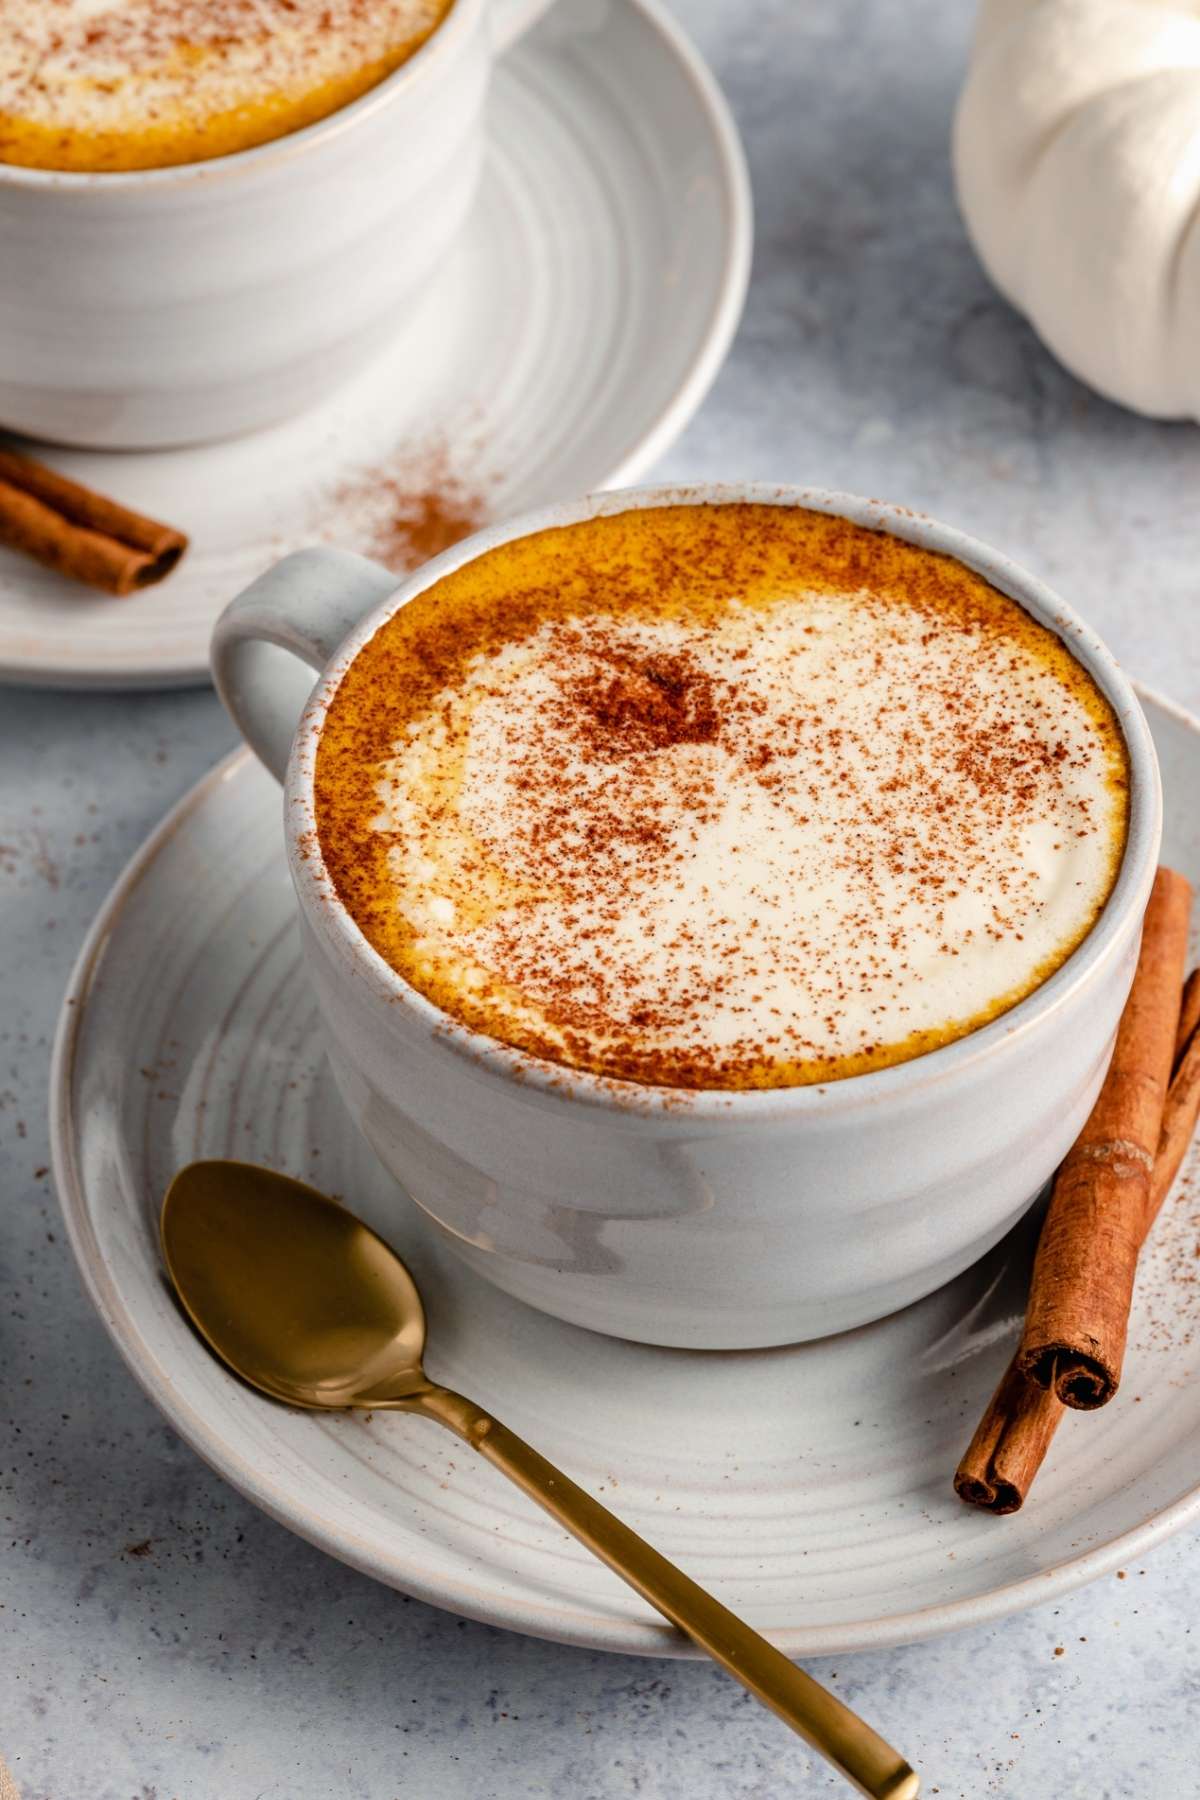 Mug of coffee made topped with foamy cream and spices.